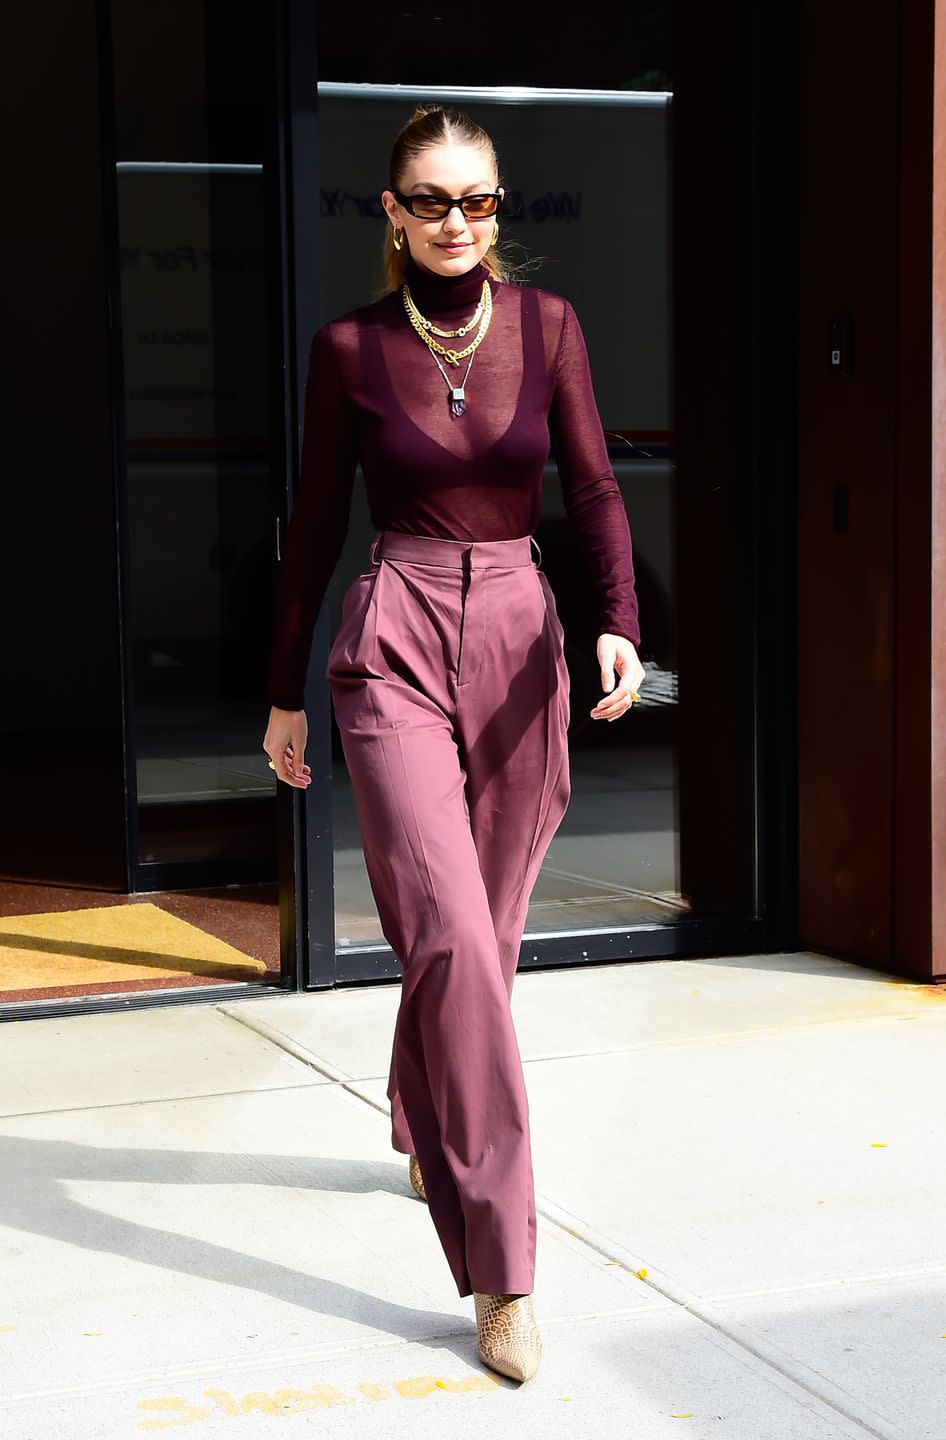 <p>In a sheer wine turtleneck, bra, high-waisted trousers, black shades, <a href="https://www.liliclaspe.com/collections/just-listed/products/mia-hoops-small" rel="nofollow noopener" target="_blank" data-ylk="slk:gold crescent hoops" class="link ">gold crescent hoops</a> by Lili Claspe, the <a href="https://www.missoma.com/shop/categories/necklaces/chain-necklaces/9323/lucy-williams-gold-chunky-chain-necklace/" rel="nofollow noopener" target="_blank" data-ylk="slk:T Bar Chunky Chain Necklace" class="link ">T Bar Chunky Chain Necklace</a> by Missoma, and pointed python boots.</p>